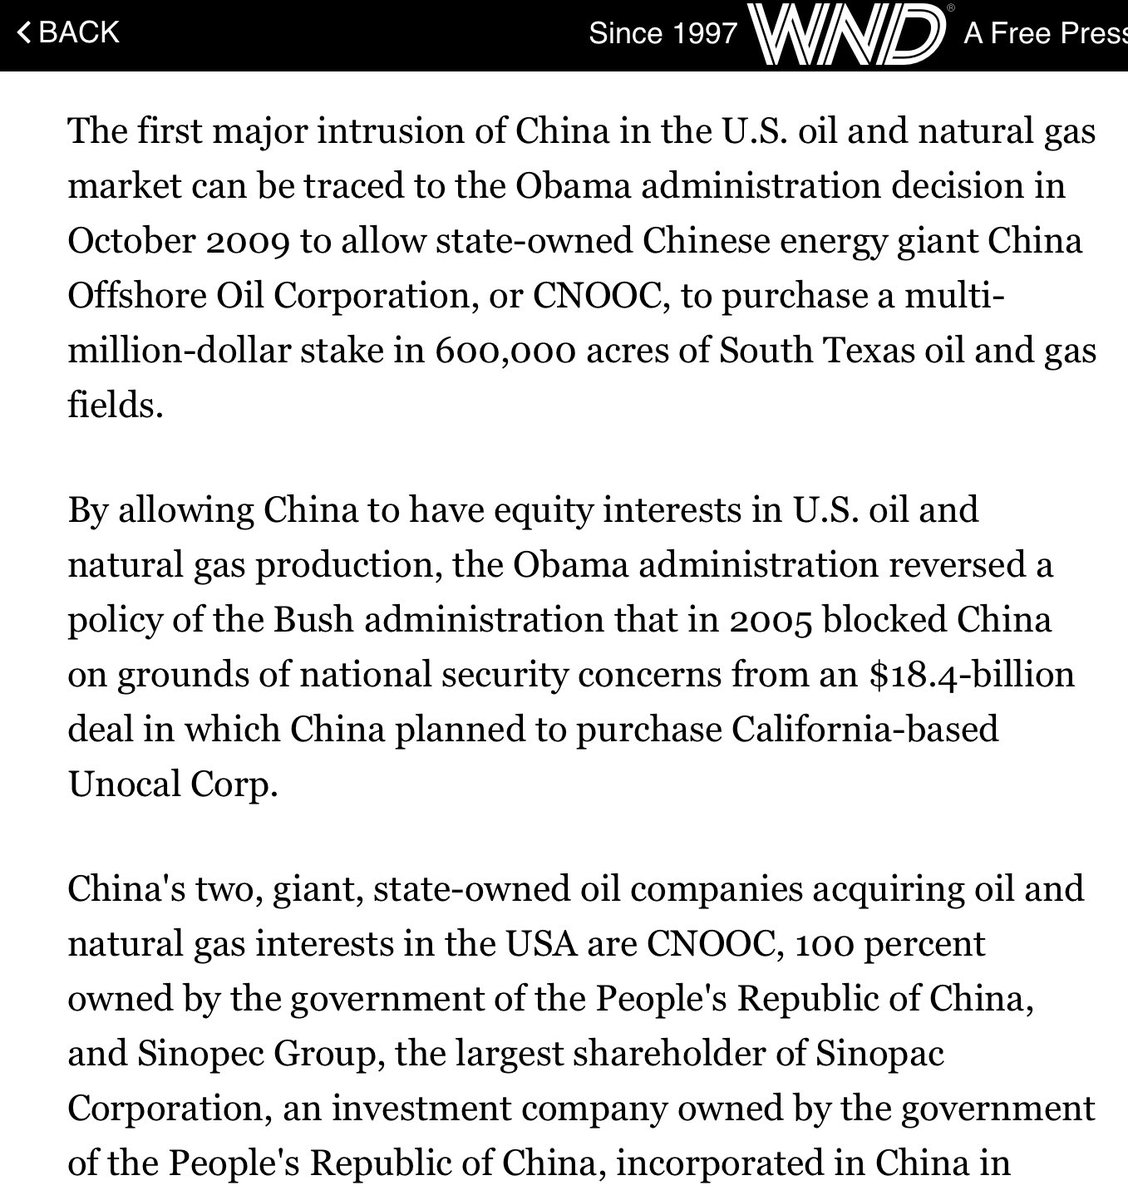 2012: WSJ compiled a state-by-state list of the $17B in oil & natural gas equity interests CNOOC & Sinopec have acquired in the US since 2010: